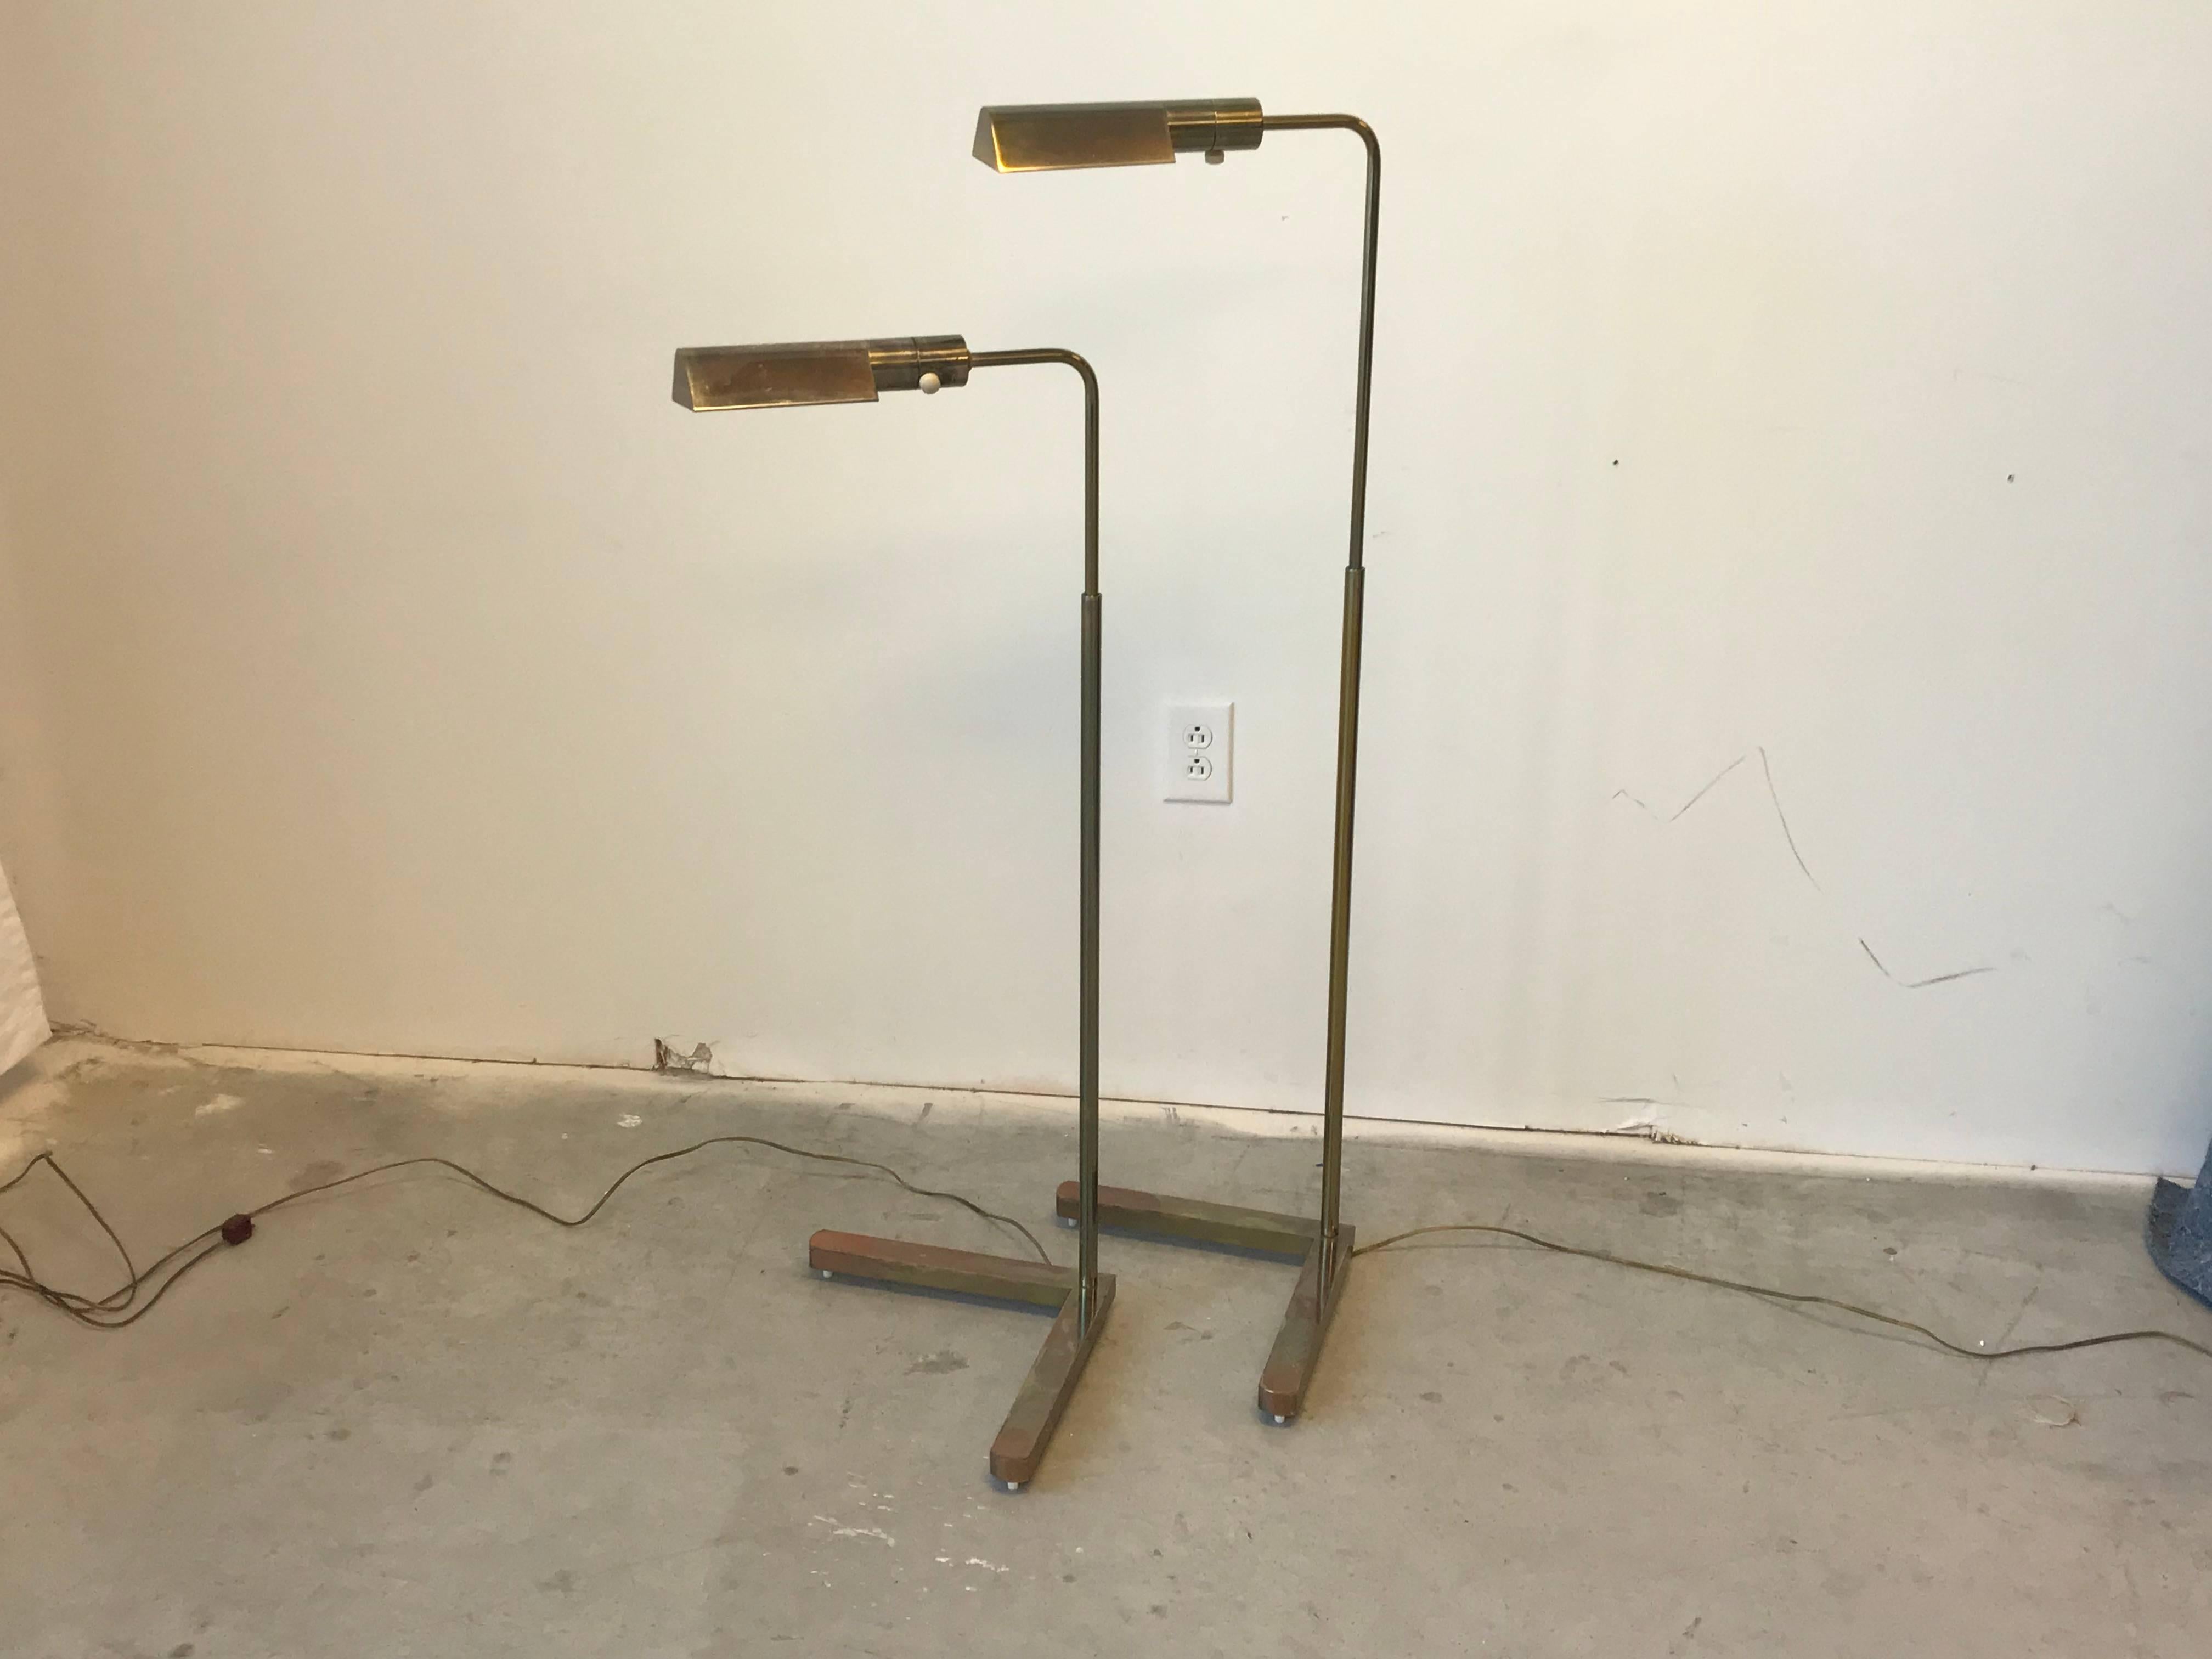 Offered is a stunning, pair of 1970s Casella swivel floor lamps with V-shaped bases. The pair have a brass-bronze finish. Manufactured in San Francisco, California, USA. Each lamp includes the original tag on underside of base. Measure: Minimum